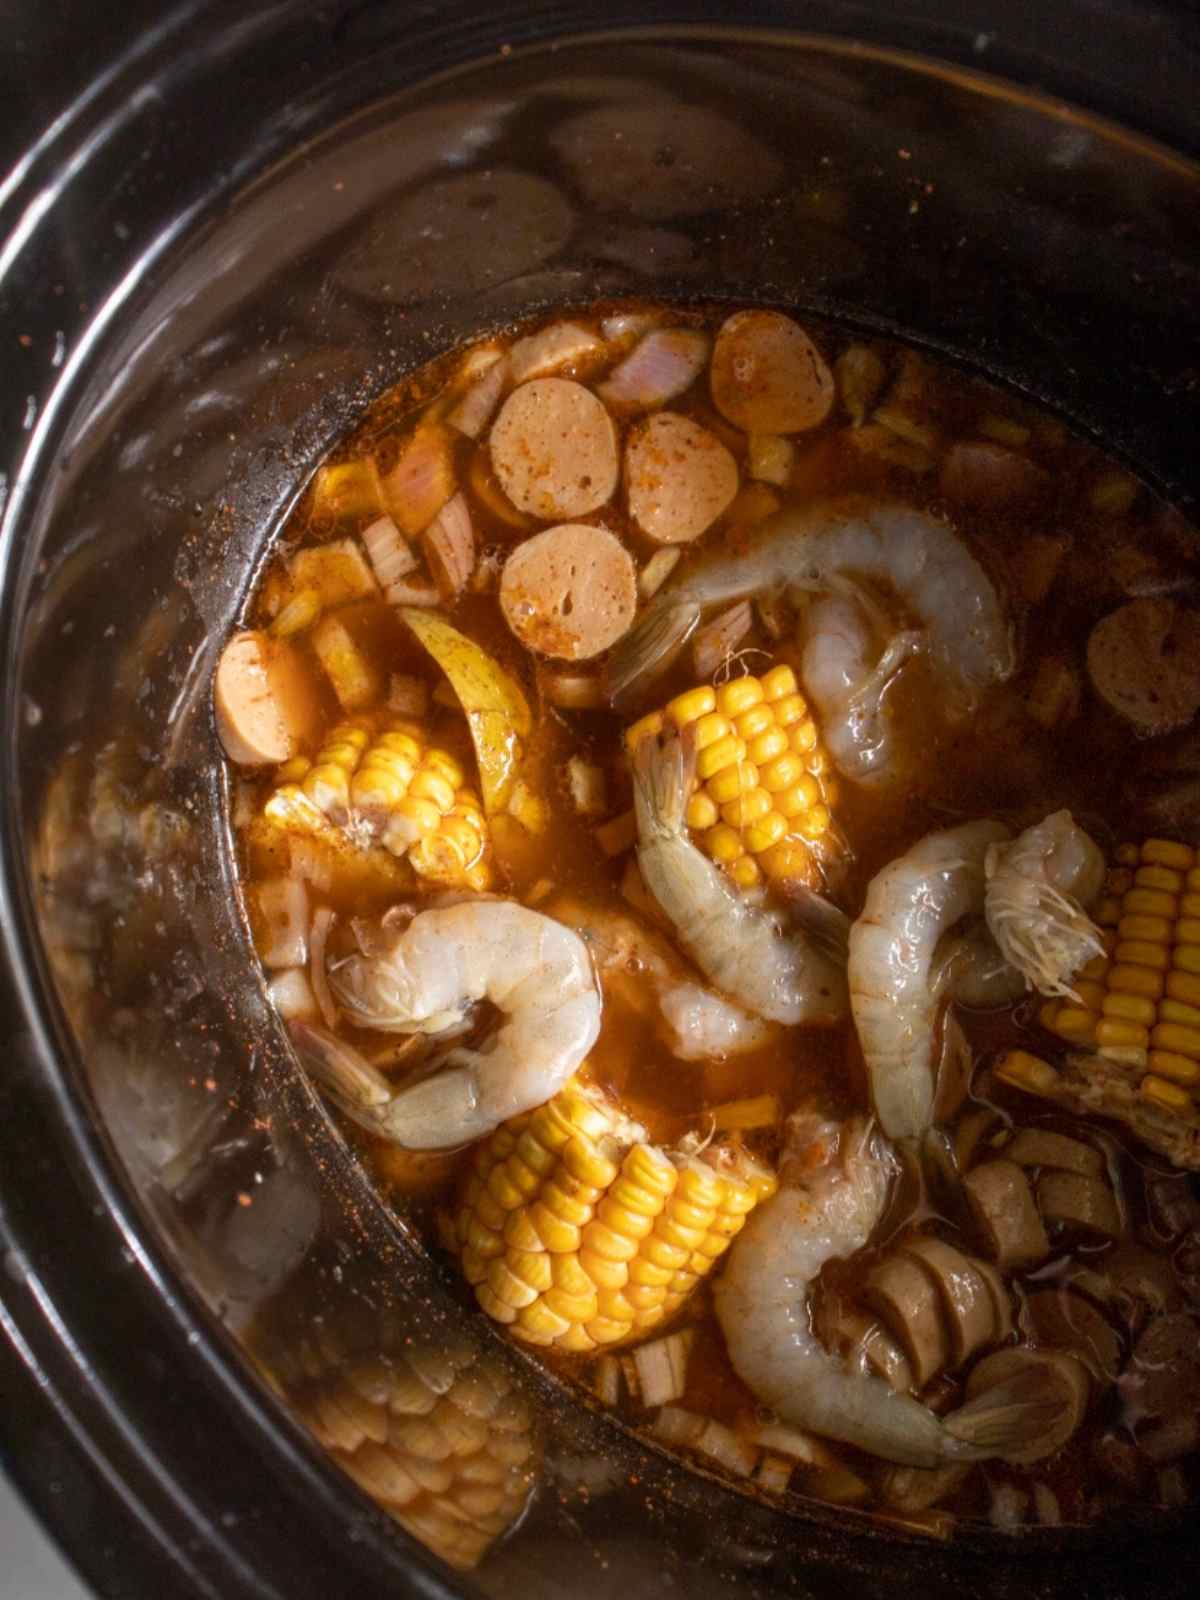 SHRIMP ADDED IN THE SLOW COOKER